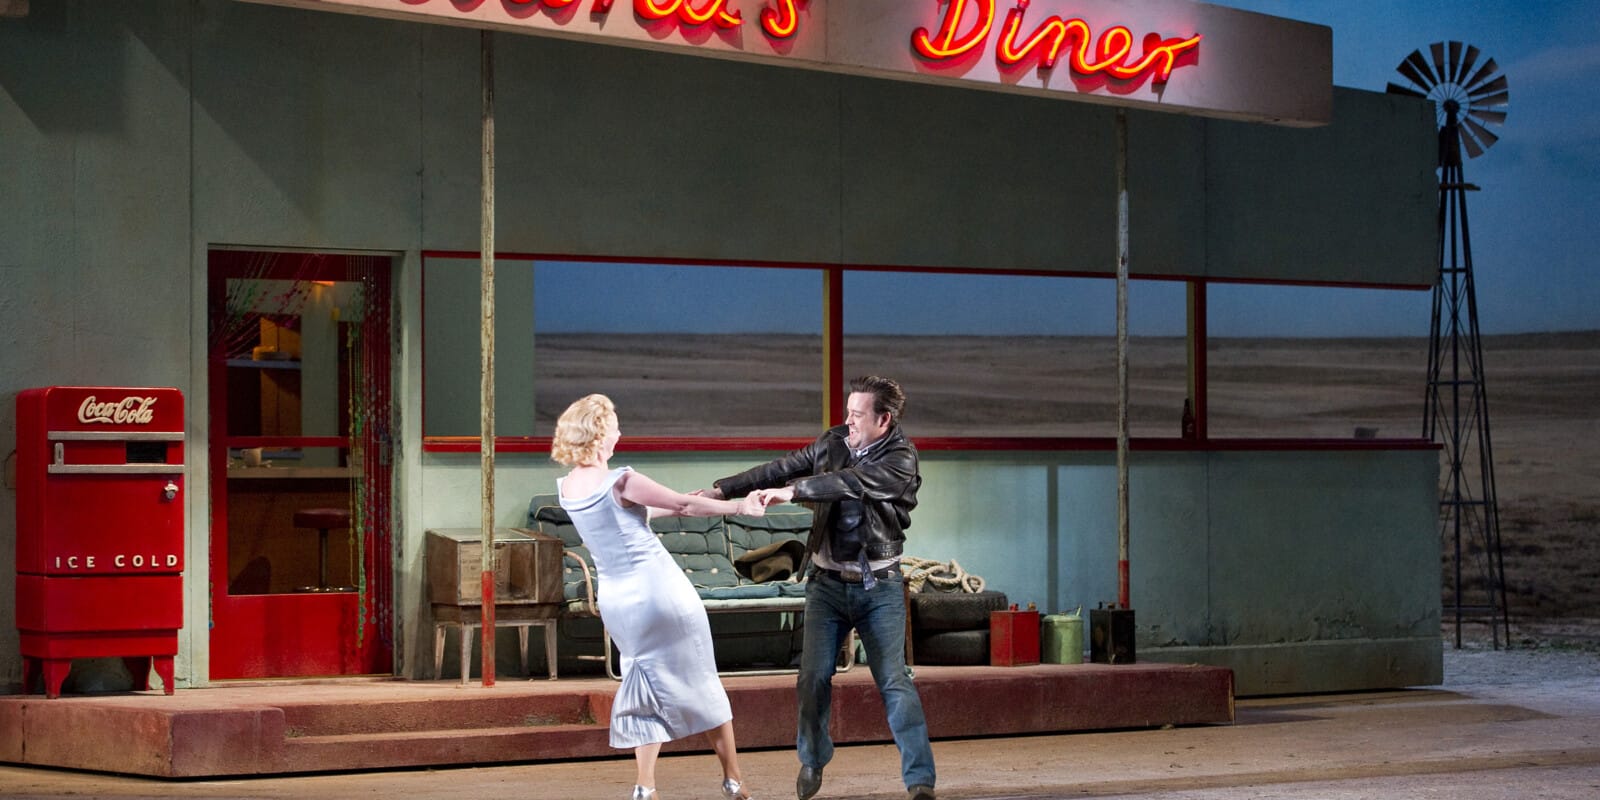 Woman in blue dress and man in black leather jacket dance underneath Adina's Diner sign